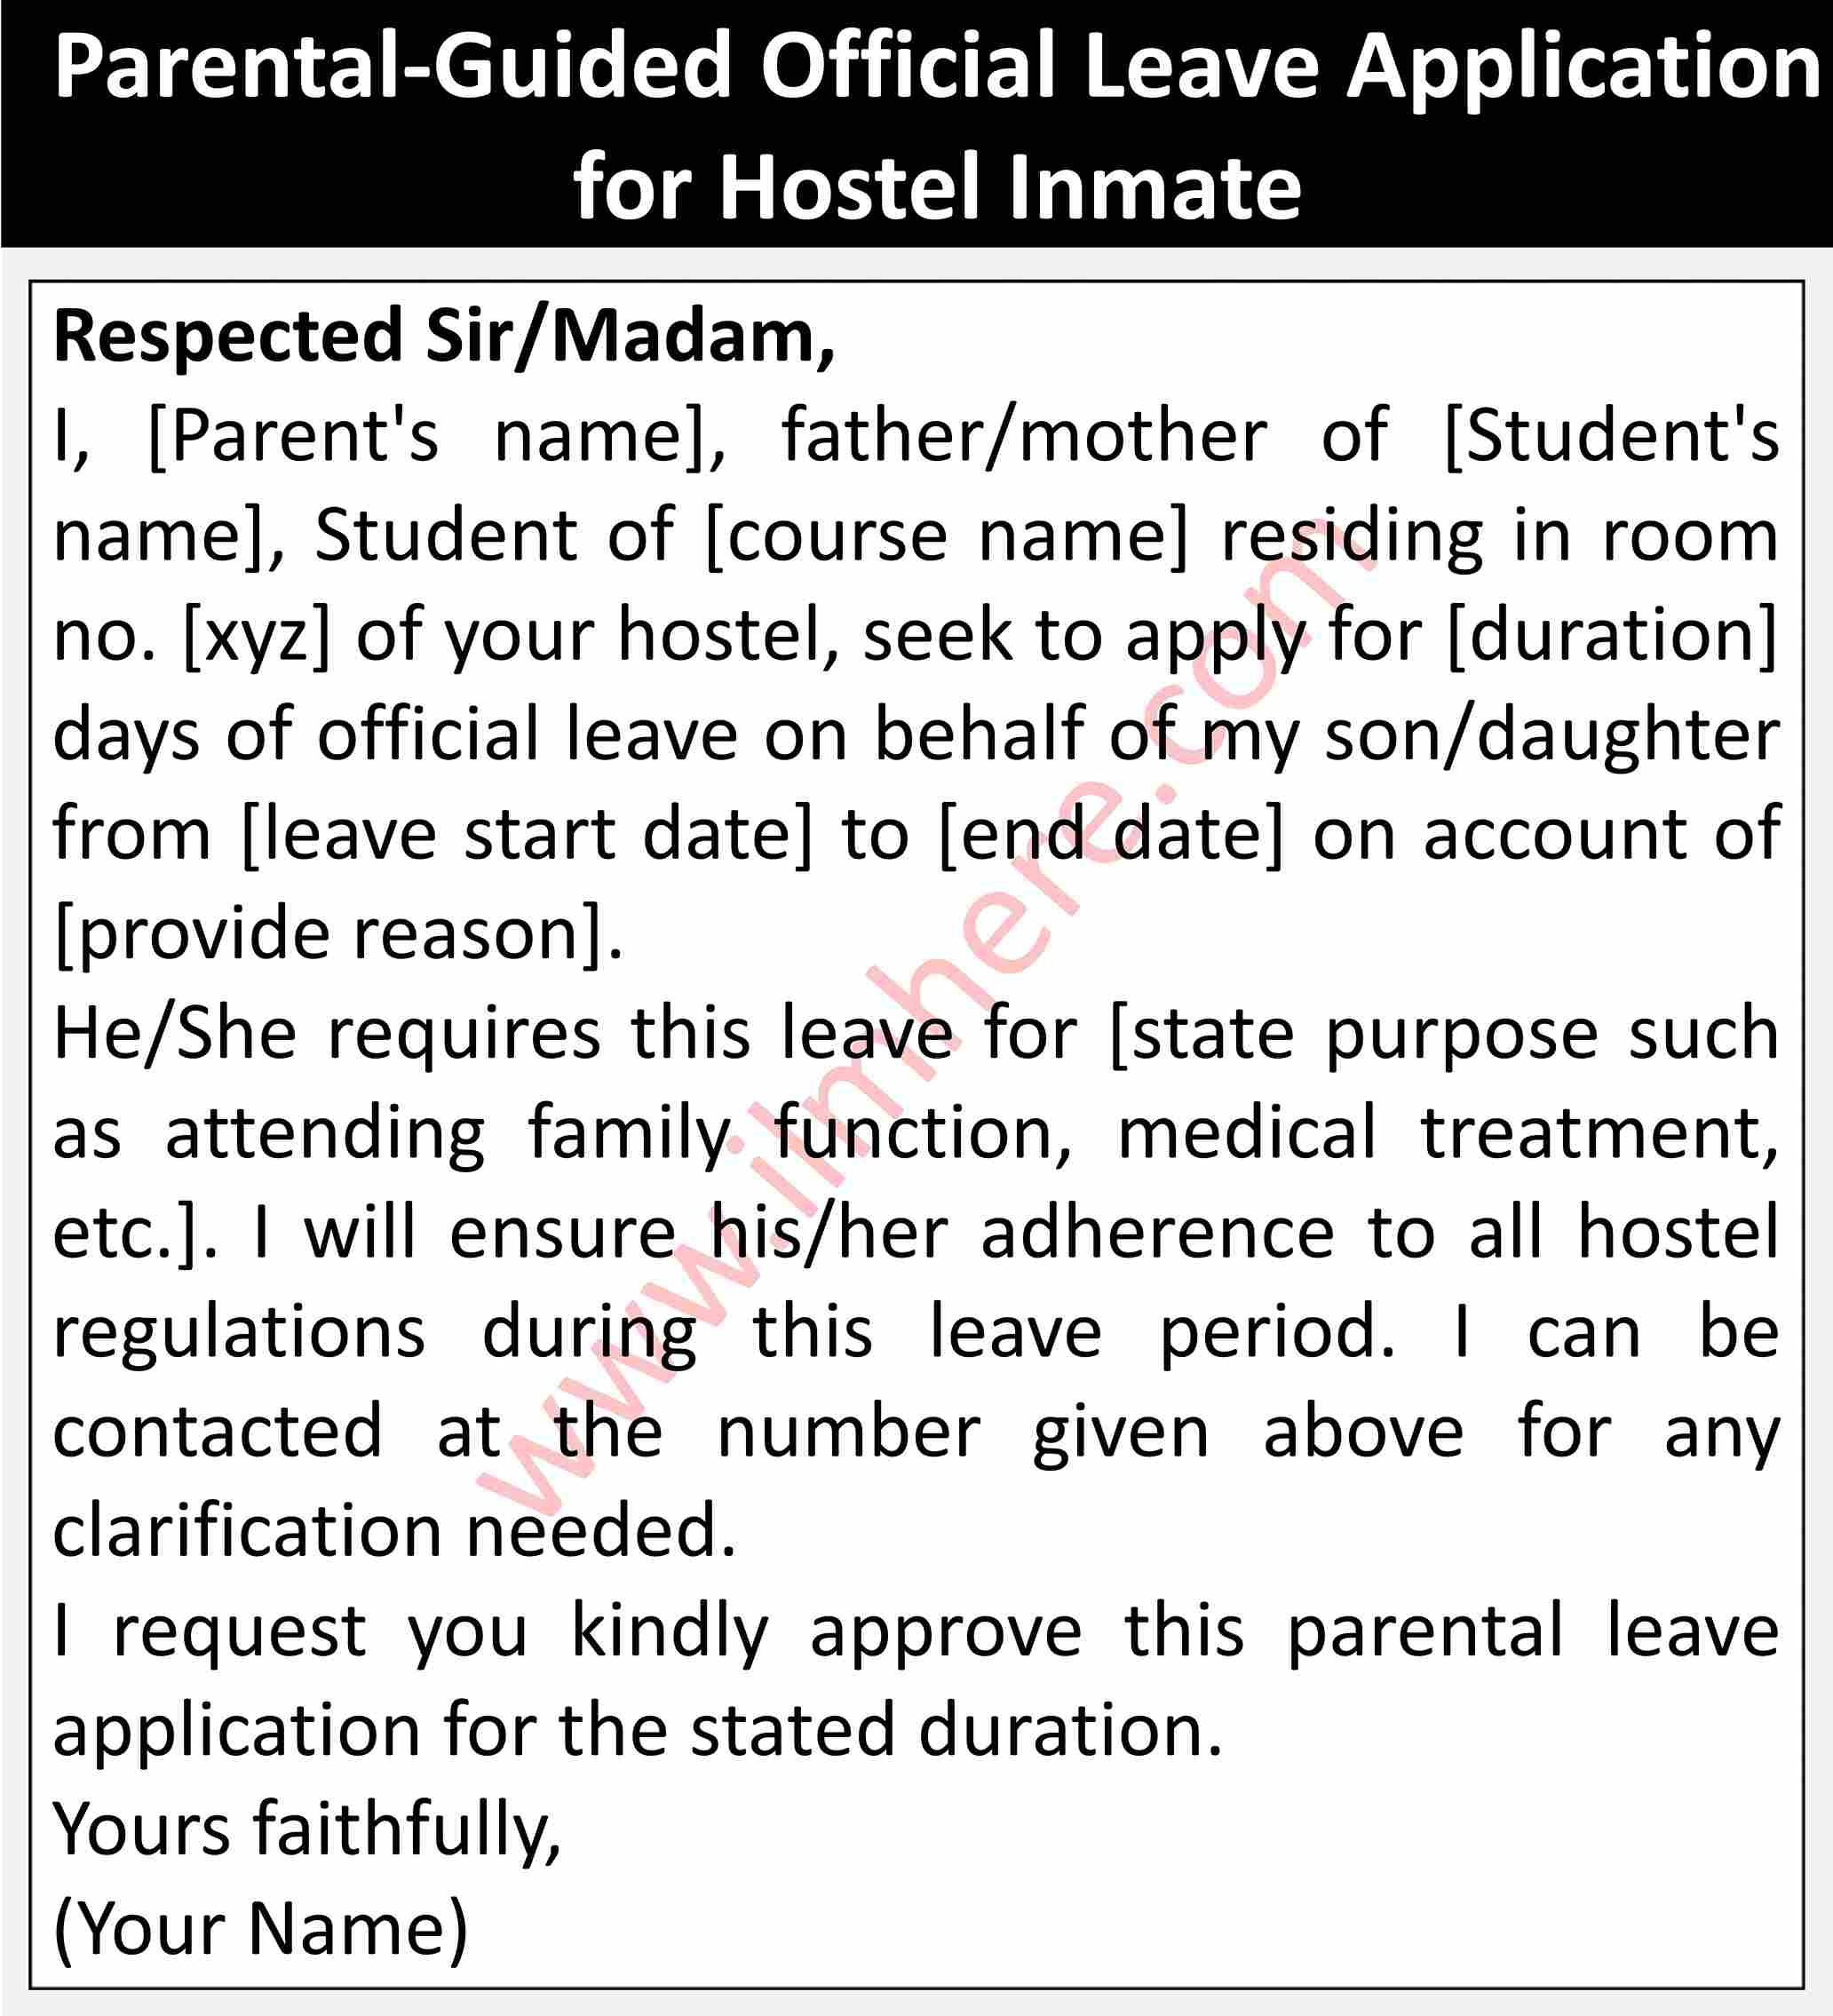 Parental-Guided Official Leave Application for Hostel Inmate